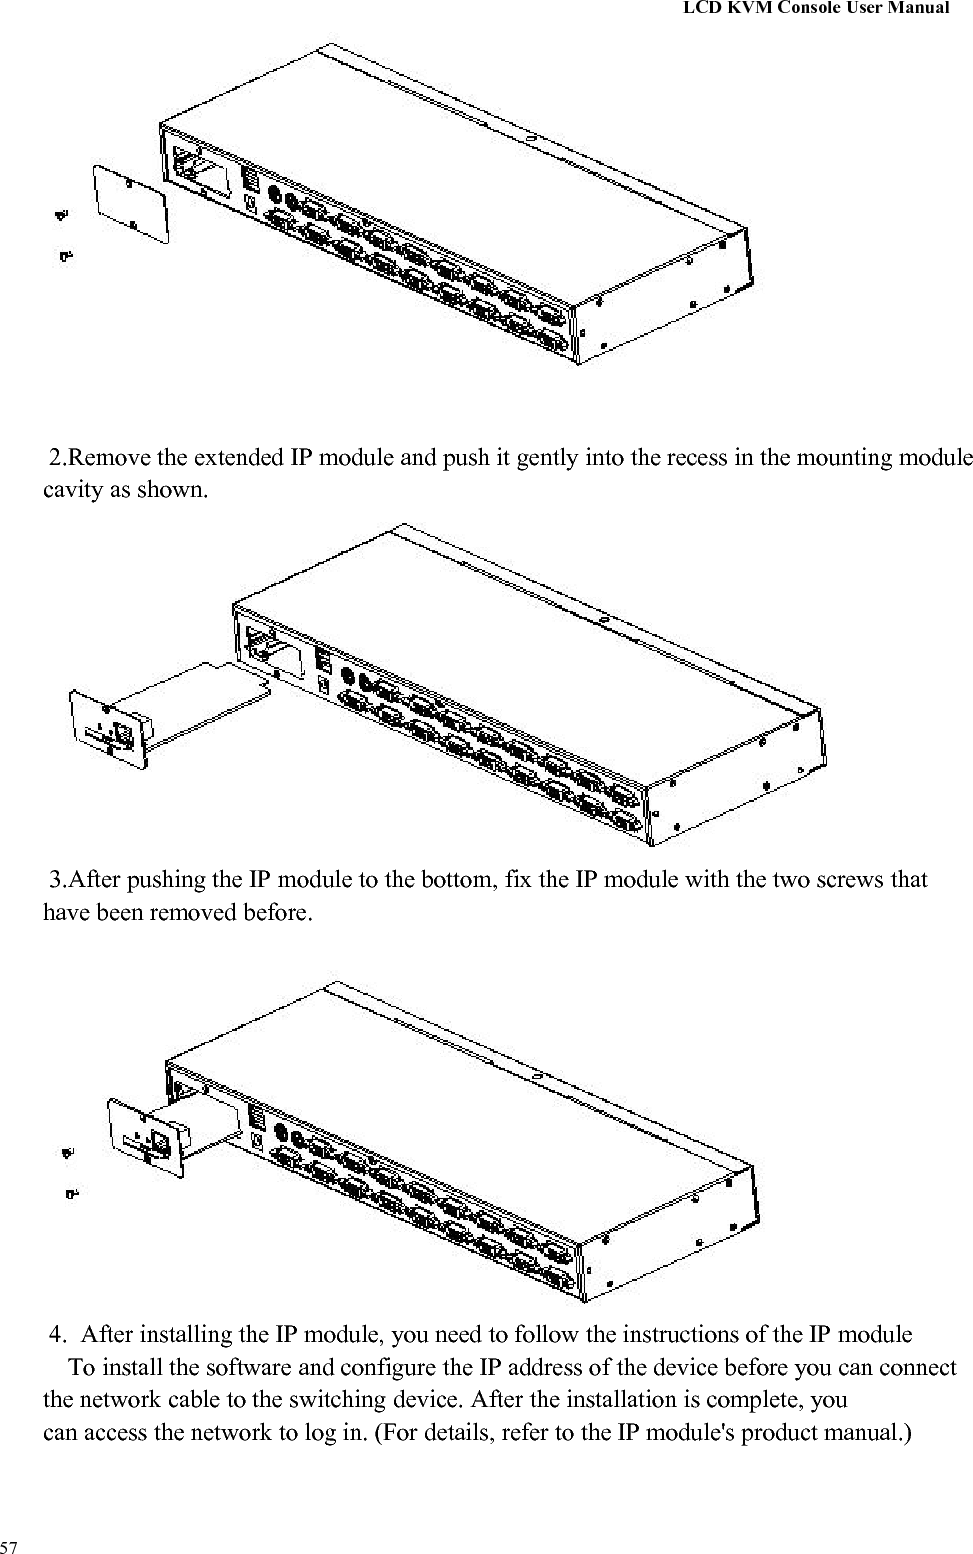 LCD KVM Console User Manual572.Remove the extended IP module and push it gently into the recess in the mounting modulecavity as shown.3.After pushing the IP module to the bottom, fix the IP module with the two screws thathave been removed before.4. After installing the IP module, you need to follow the instructions of the IP moduleTo install the software and configure the IP address of the device before you can connectthe network cable to the switching device. After the installation is complete, youcan access the network to log in. (For details, refer to the IP module&apos;s product manual.)